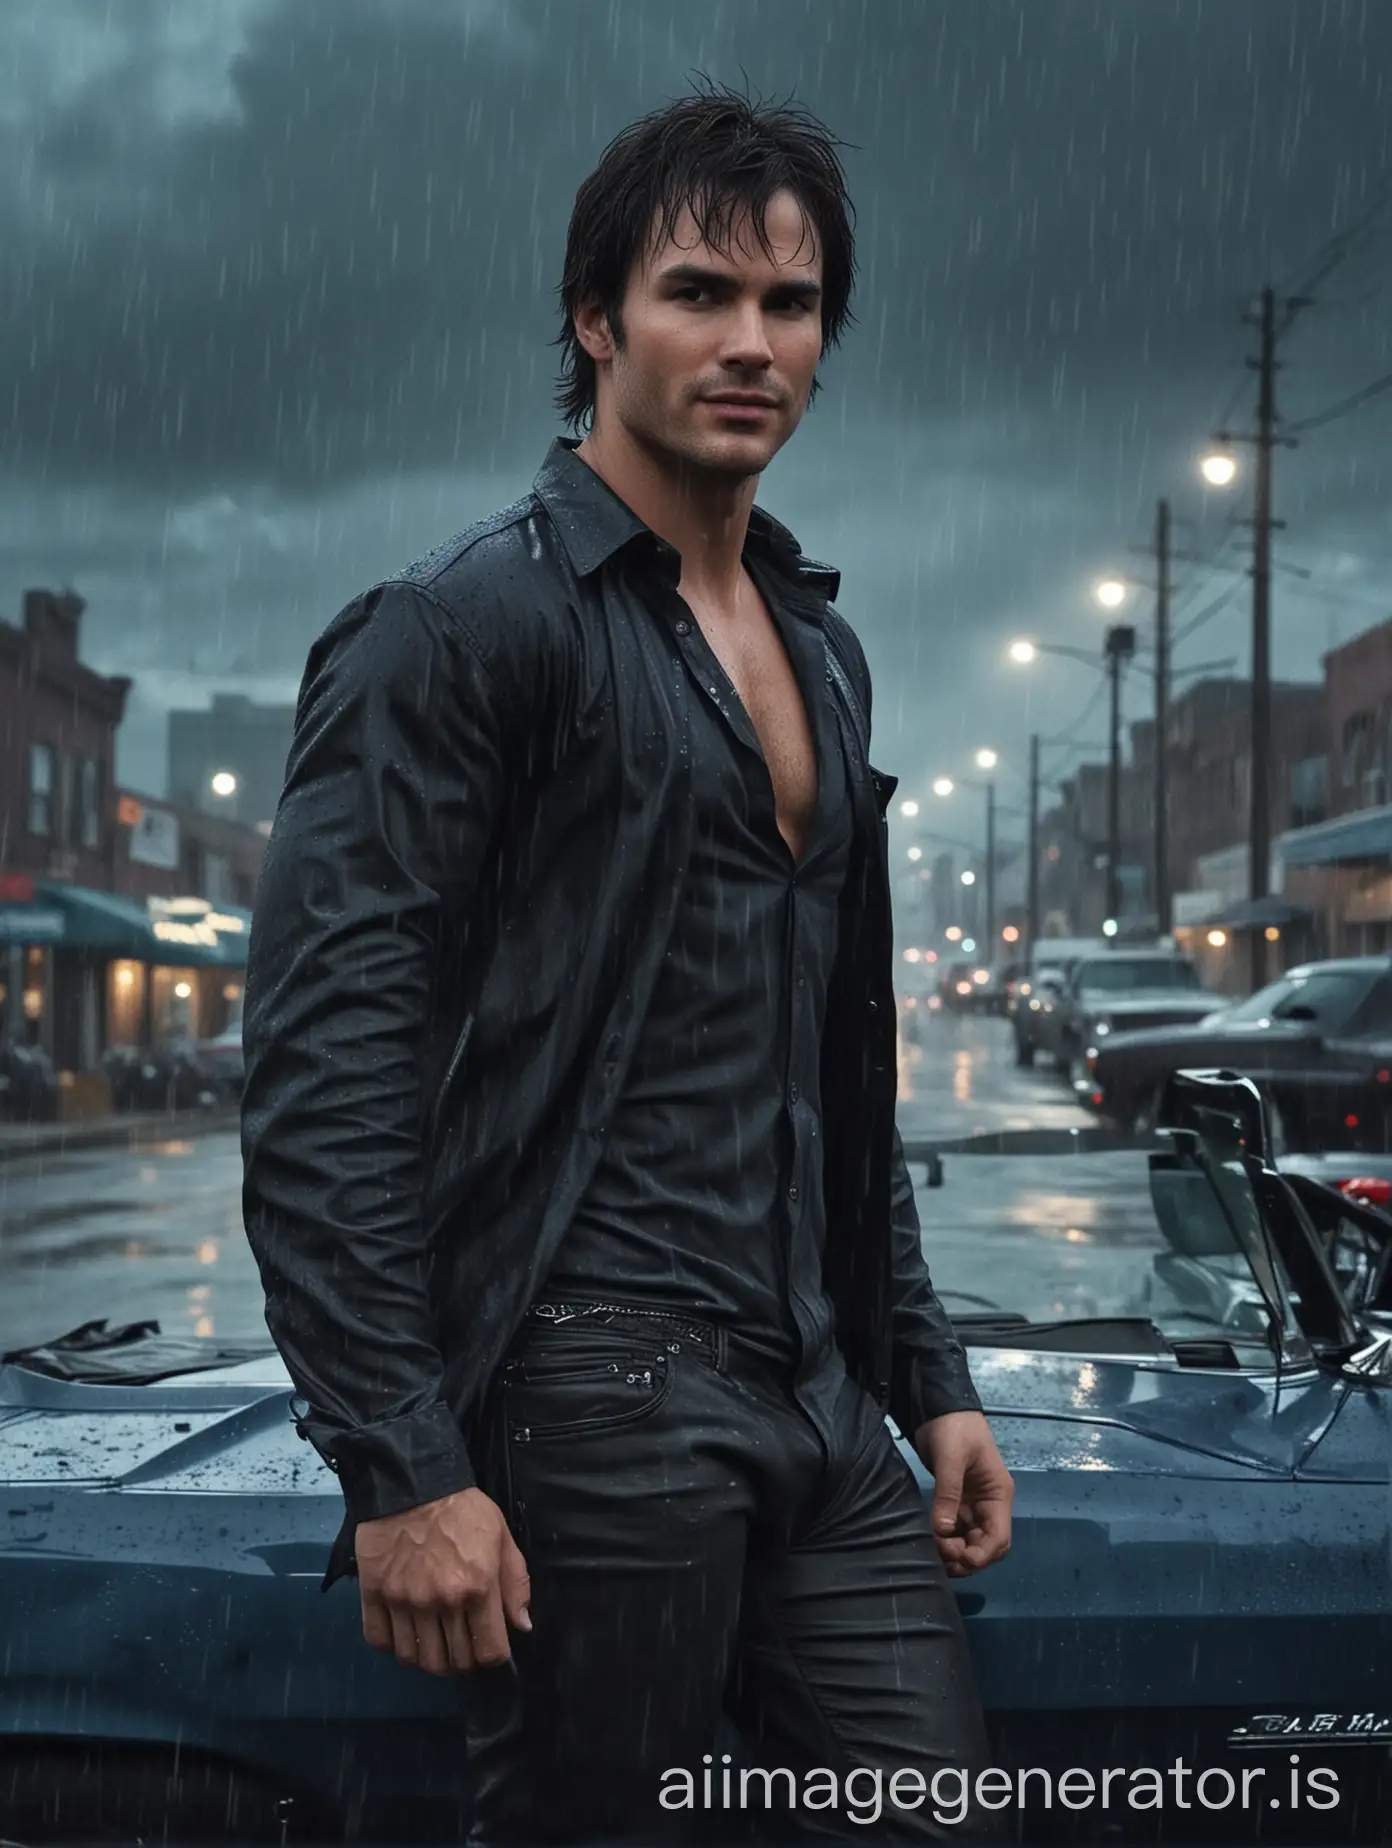 ian somerhalder face, rain falling, looking back, wearing a black unbuttoned shirt, muscle chest, pale fair body, blue 1969 Chevy Camaro Convertible in the background, devilish smile, wearing a black leather trousers, dystopian city background, stormy clouds, foggy background, midnight, fullmoon